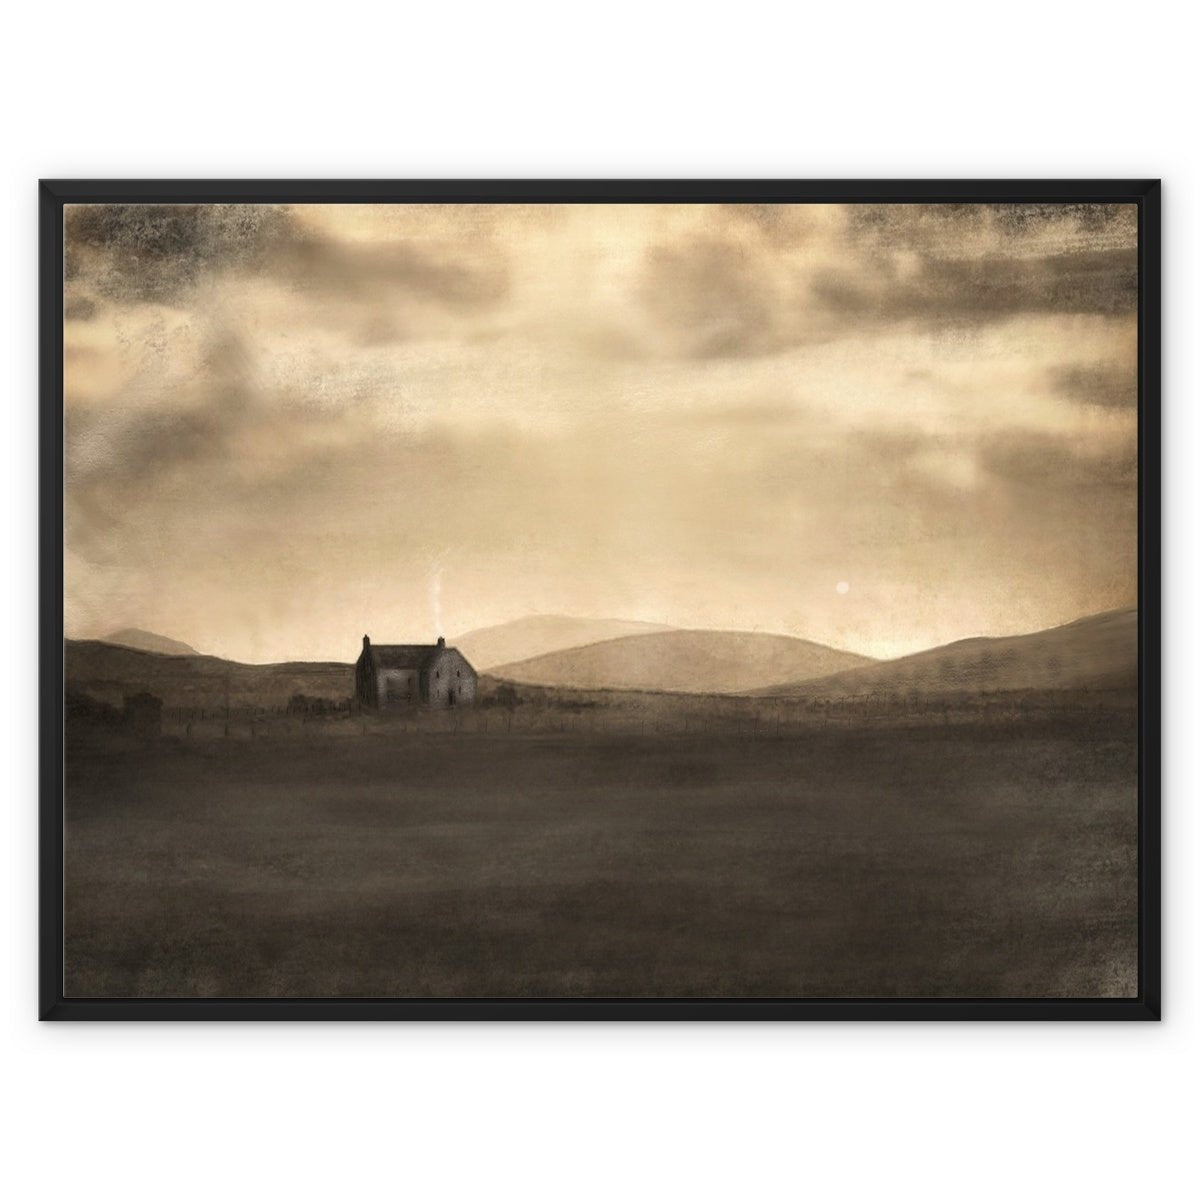 A Moonlit Croft Painting | Framed Canvas From Scotland-Floating Framed Canvas Prints-Hebridean Islands Art Gallery-32"x24"-Black Frame-Paintings, Prints, Homeware, Art Gifts From Scotland By Scottish Artist Kevin Hunter